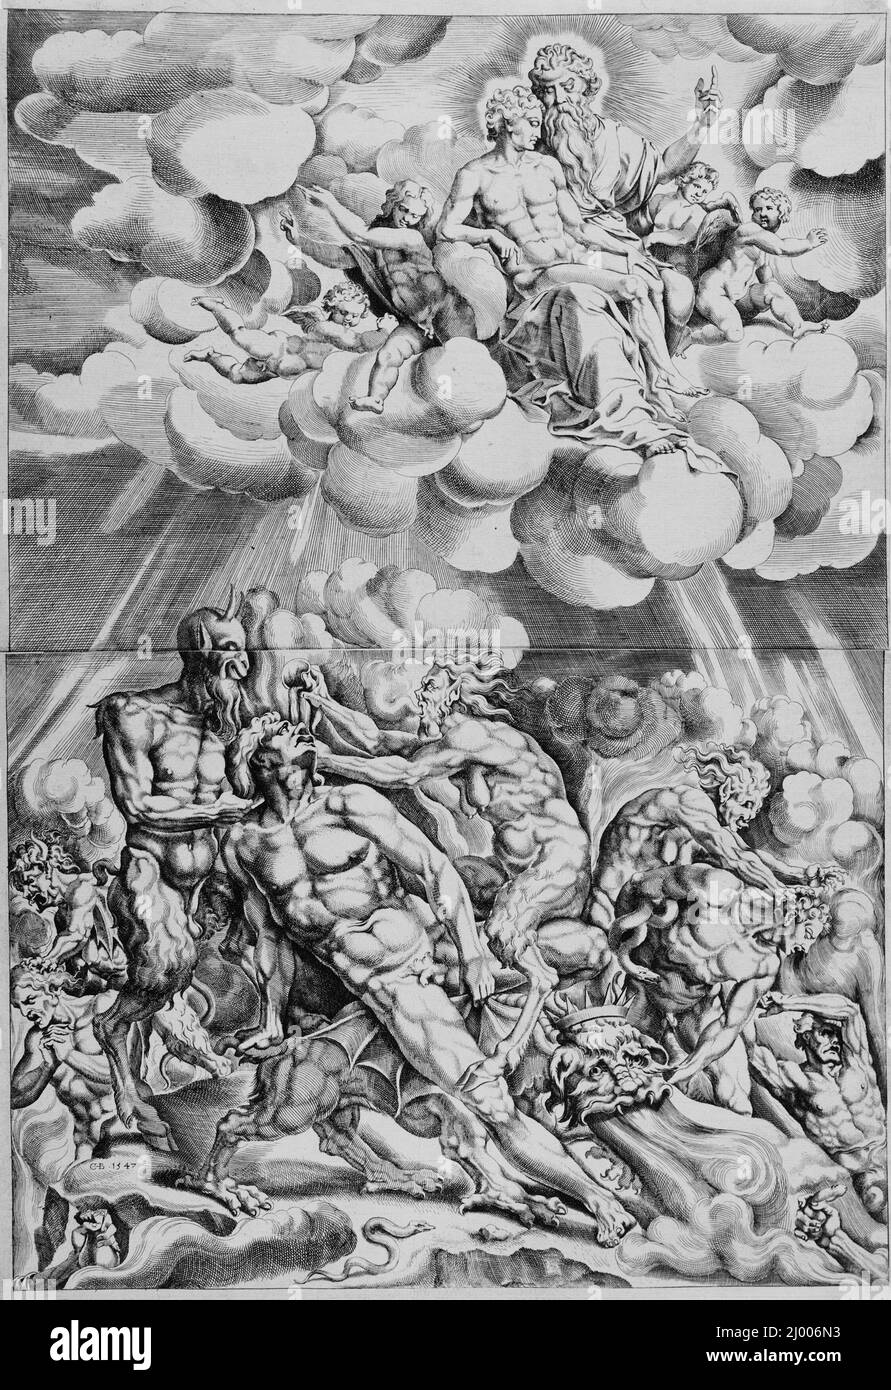 Lazarus in Heaven and the Rich Man in Hell. Cornelis Bos (Flanders, Hertogenbosch, circa 1510-before 1556). Holland, 1547. Prints; engravings. Engraving from two plates Stock Photo